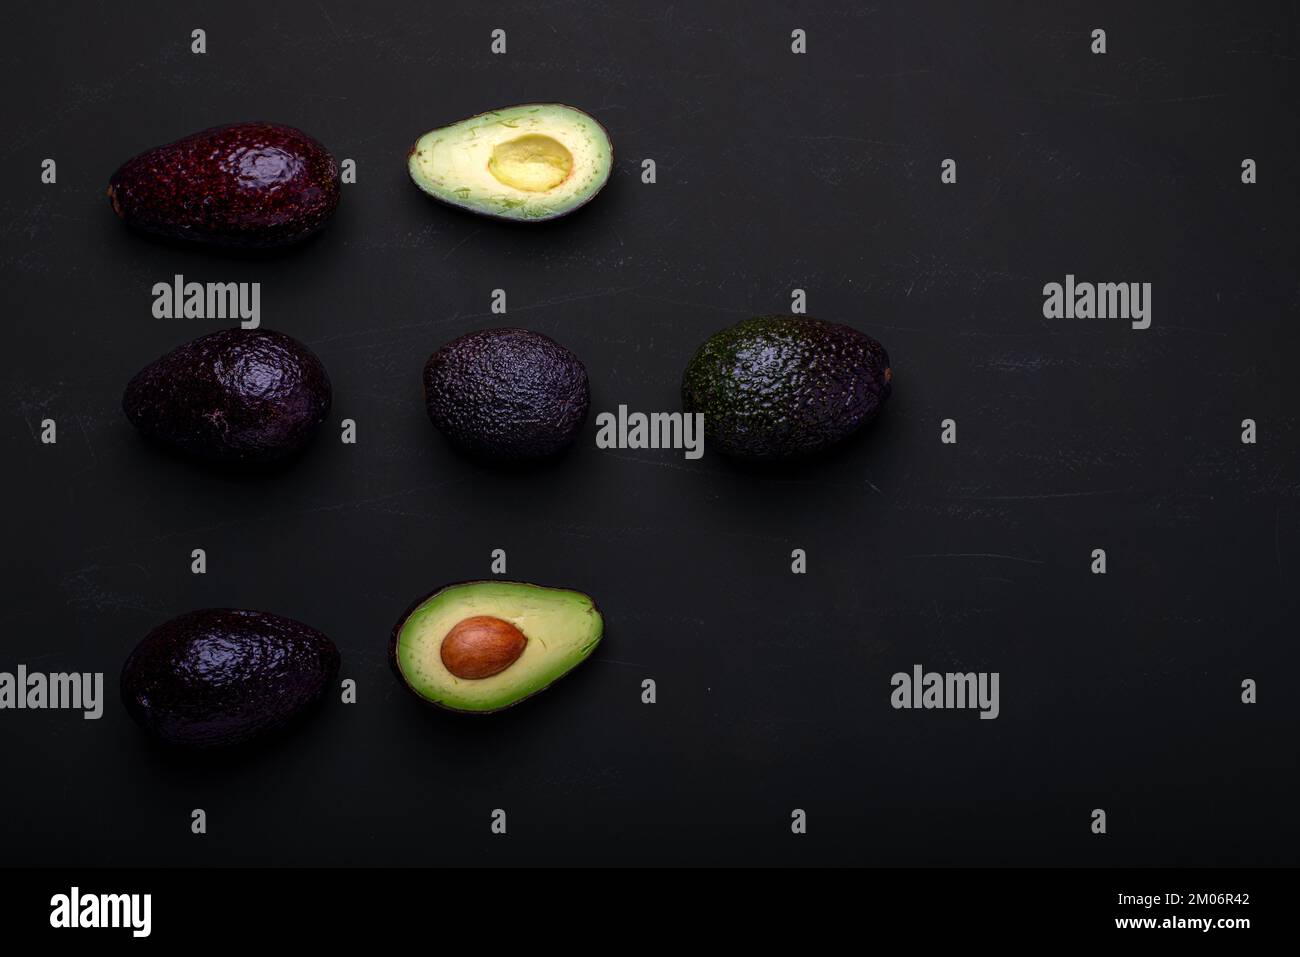 Fresh avocado on a black background. Top view. Free space for your text. Stock Photo